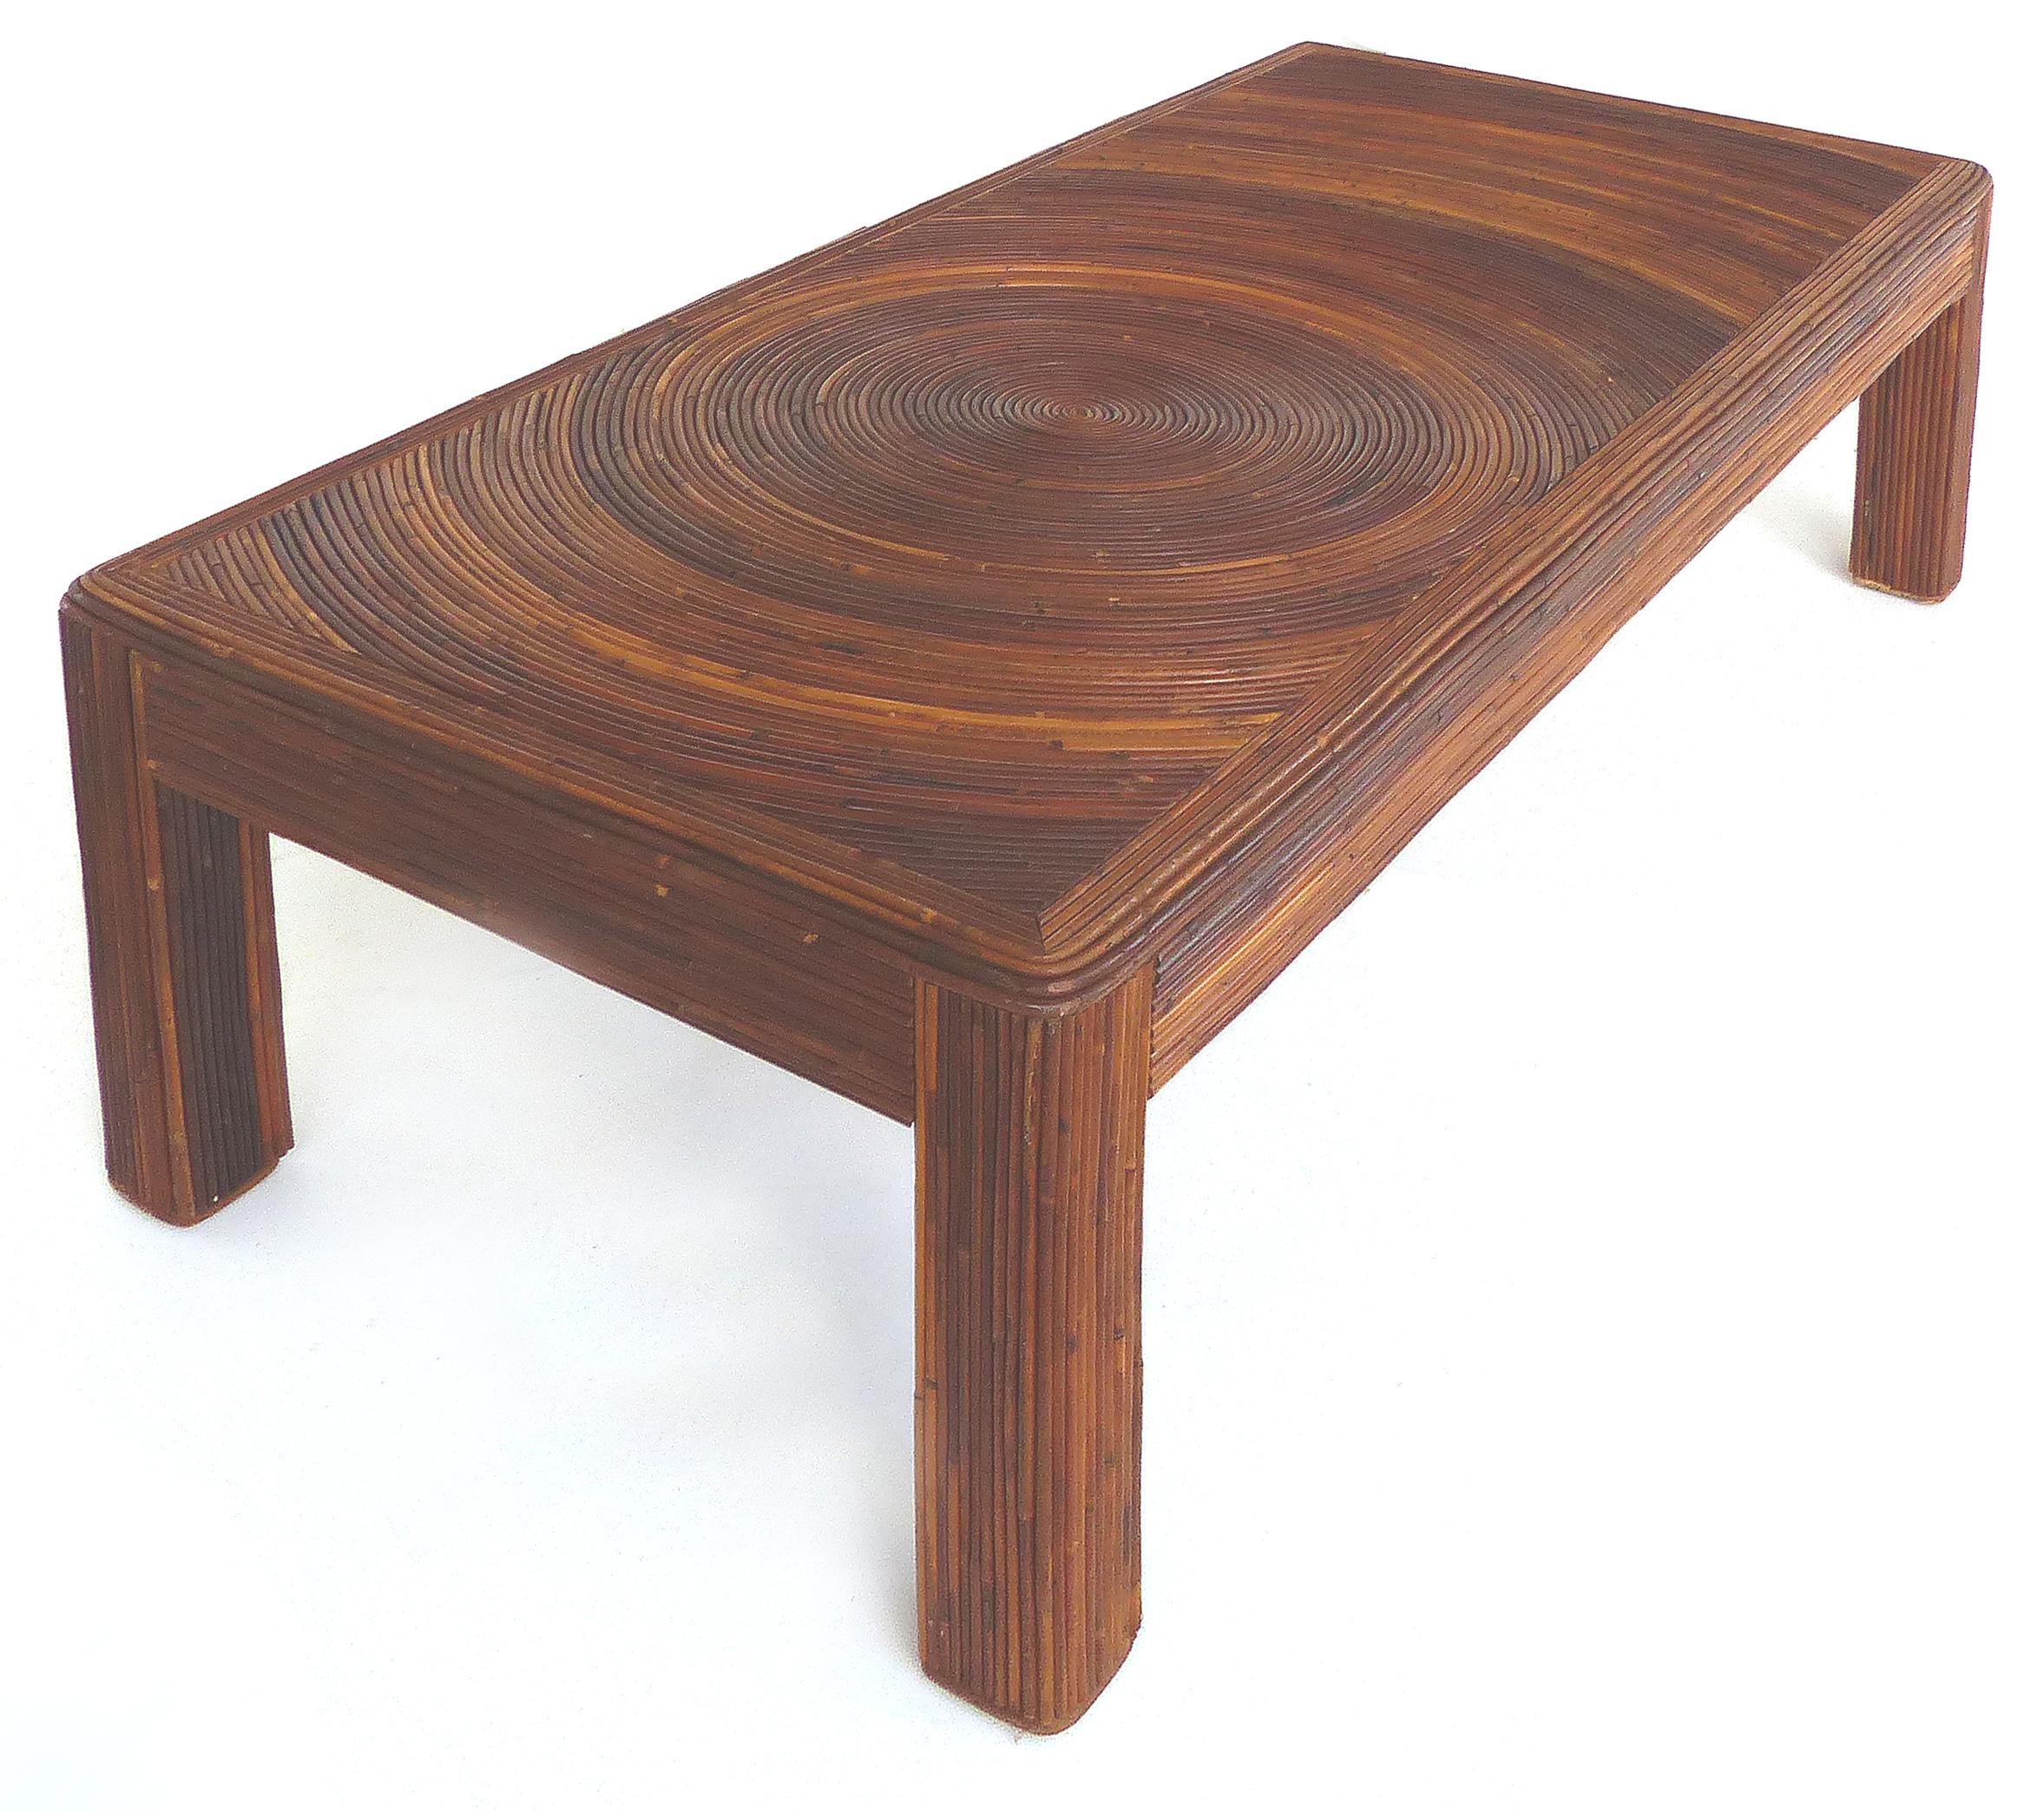 Pencil Reed Mid-Century Modern Coffee Table in the Style of Gabriella Crespi

Offered for sale is a Mid-Century Modern rectangular reeded coffee table in the manner of Gabriella Crespi. The table is clad in pencil reed and the top pattern has